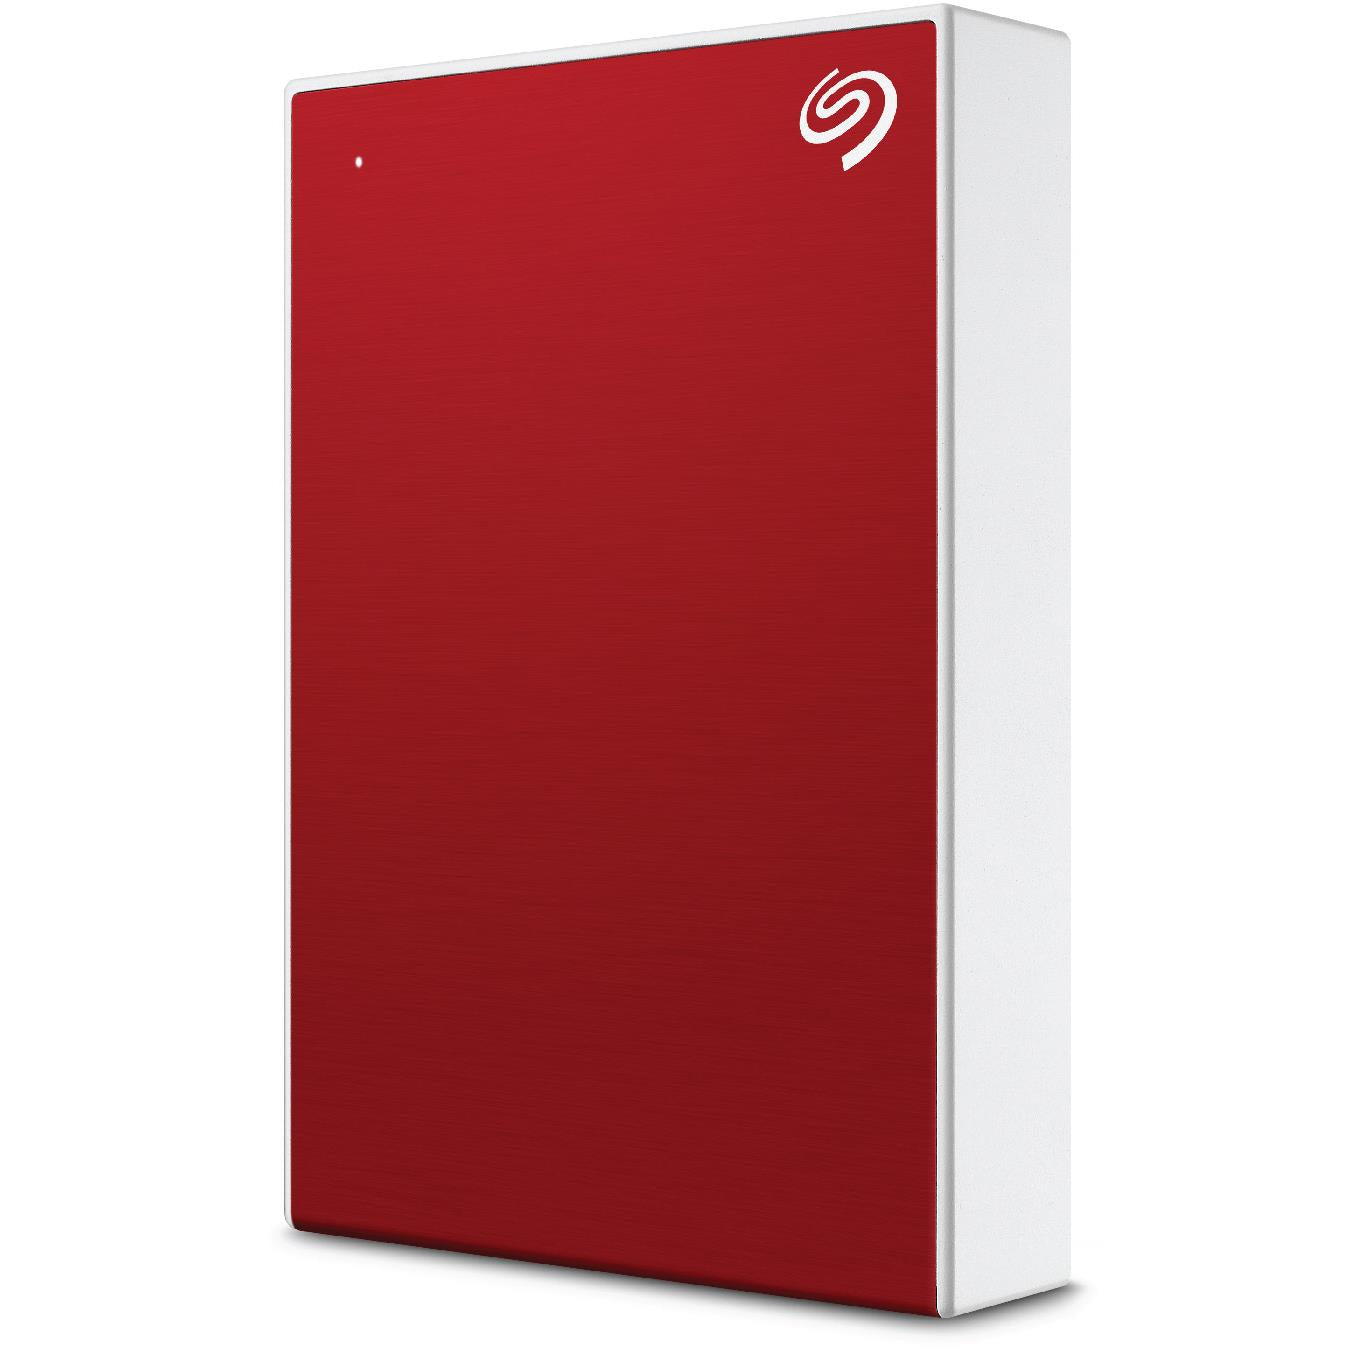 seagate one touch portable 5tb hard drive (red)